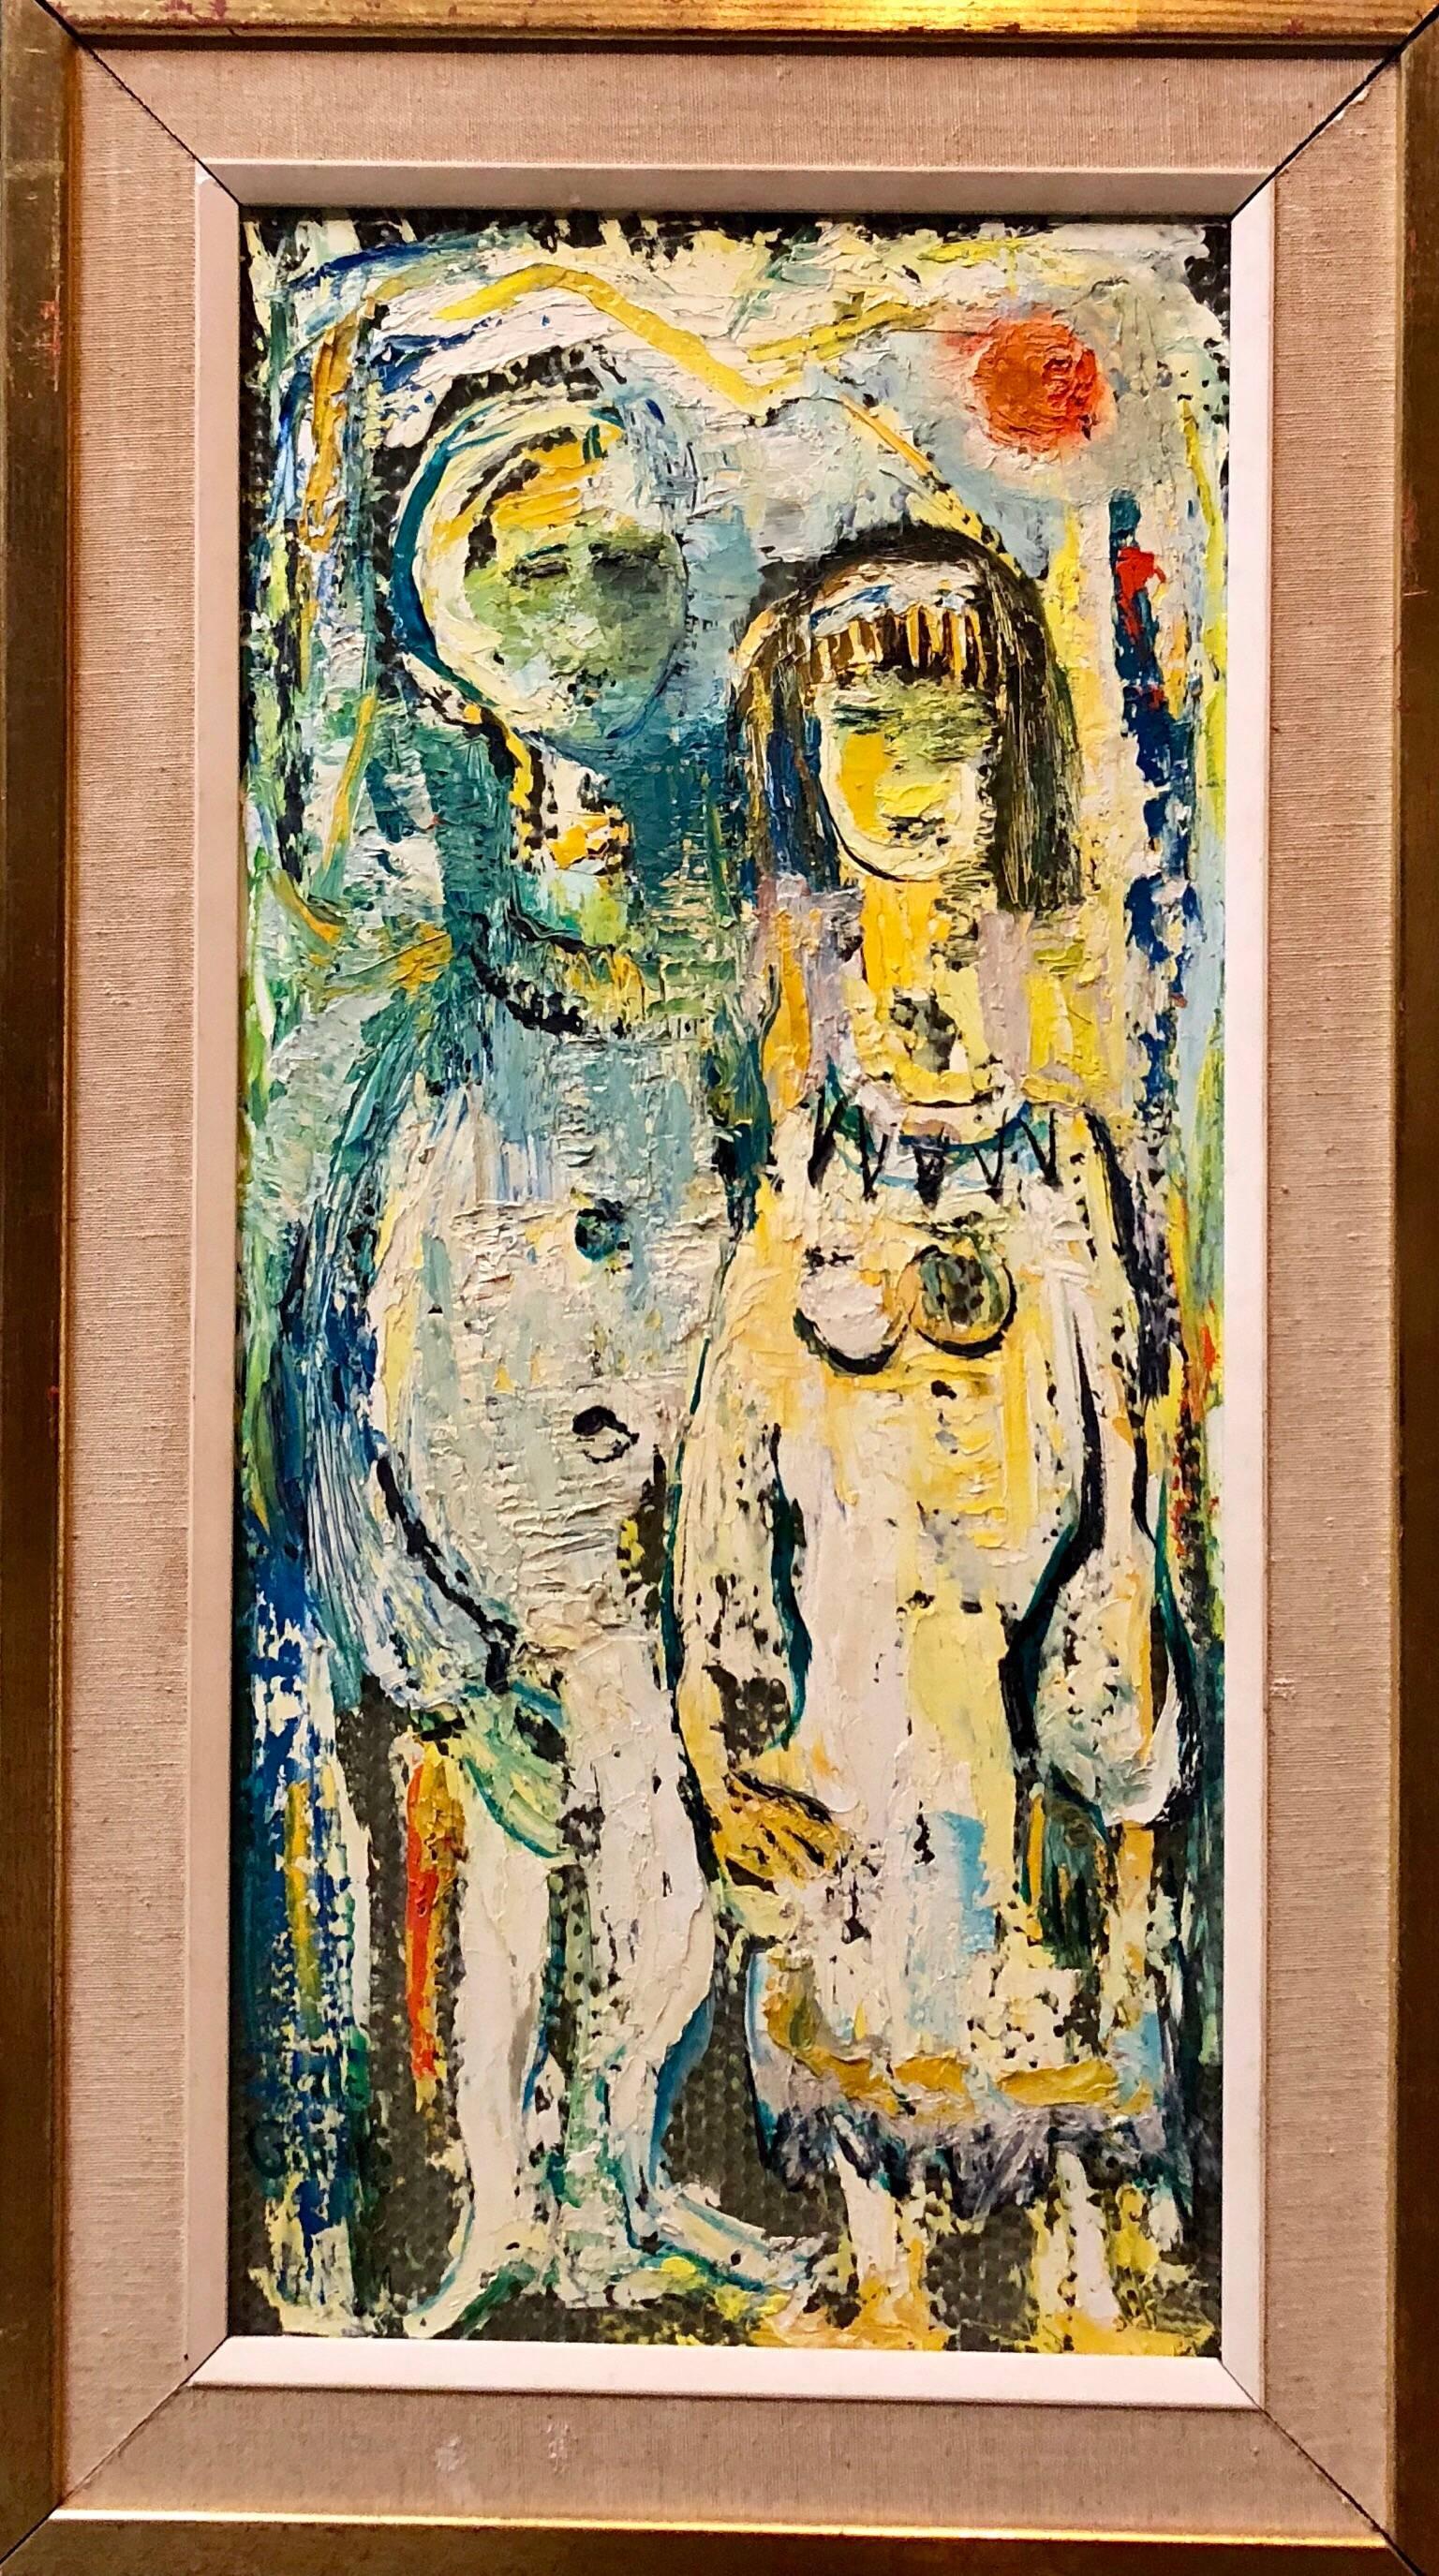 Untitled Couple Mid Century Jewish Expressionist OIl Painting - Beige Figurative Painting by Belle Golinko